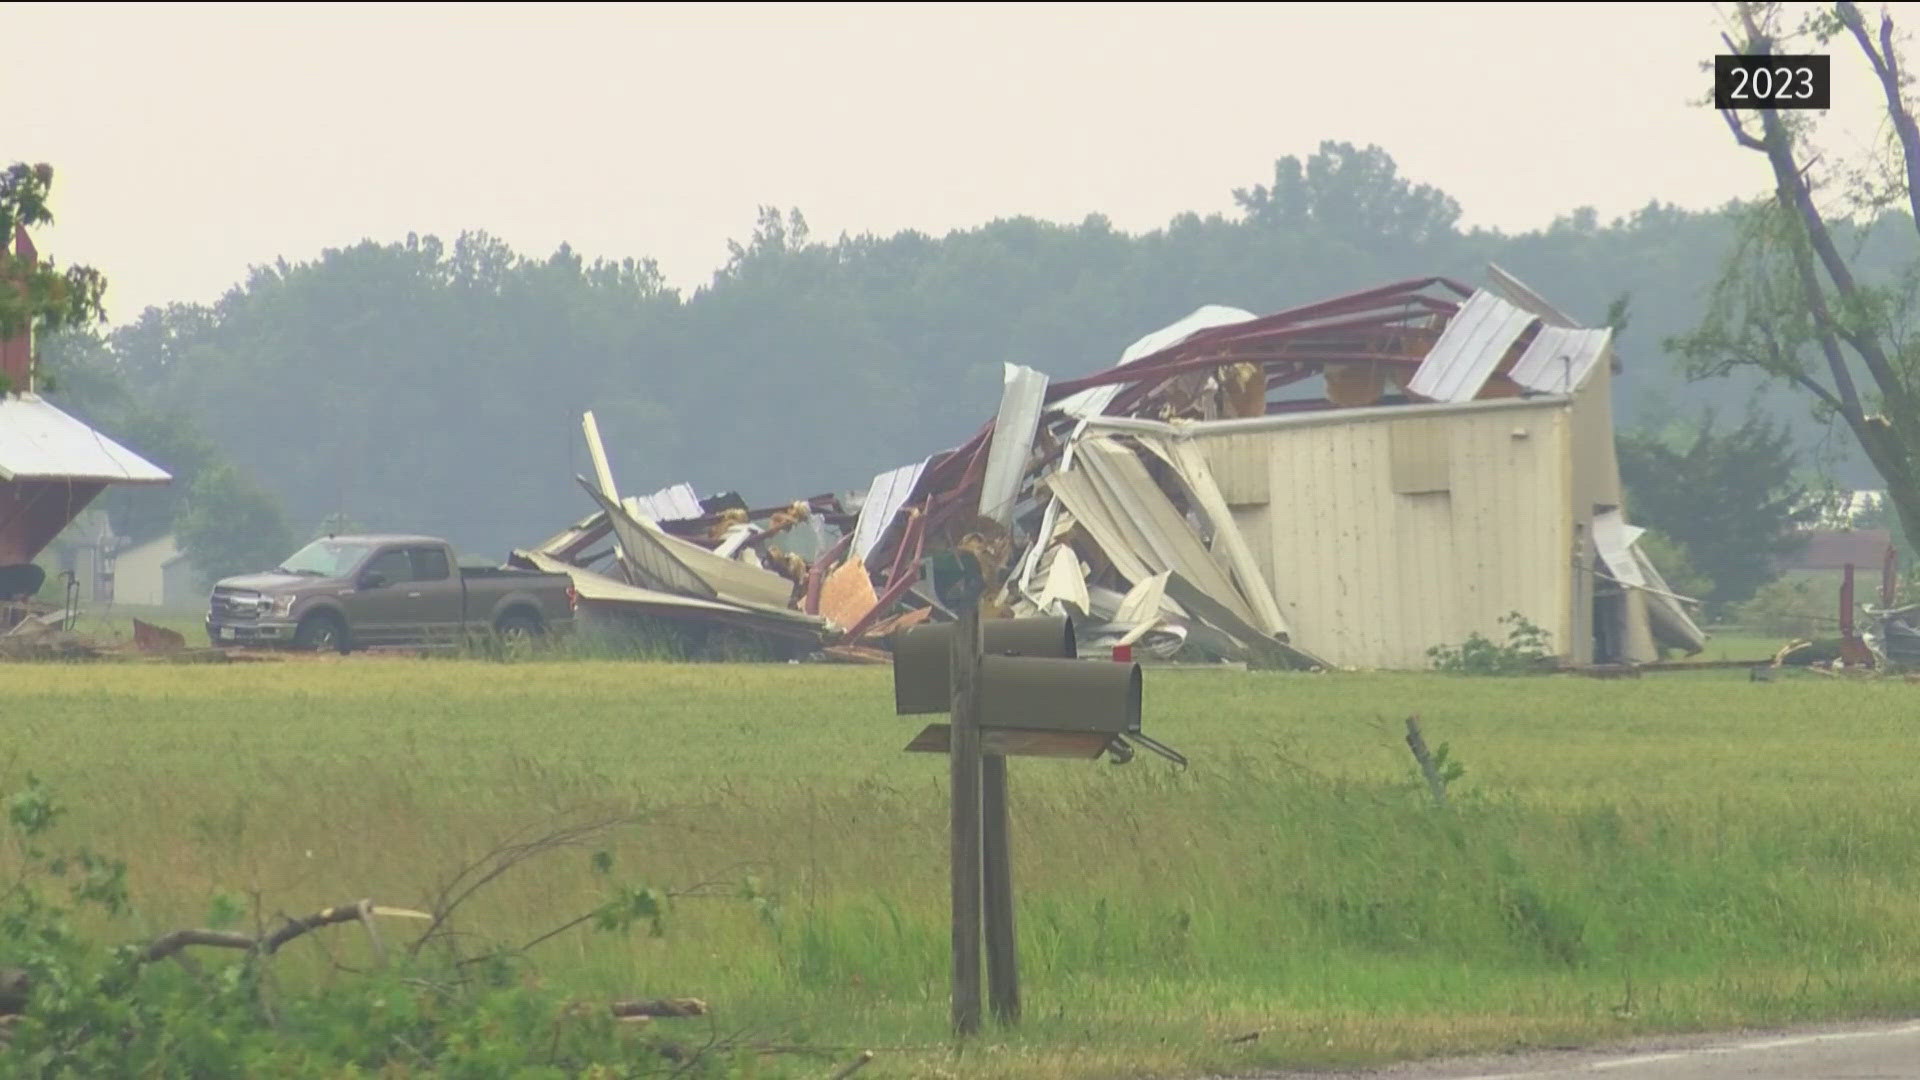 Jeff and Renee Webb lost two barns, a converted grain dryer, and an outdoor bar in the June 2023 tornado outbreak.